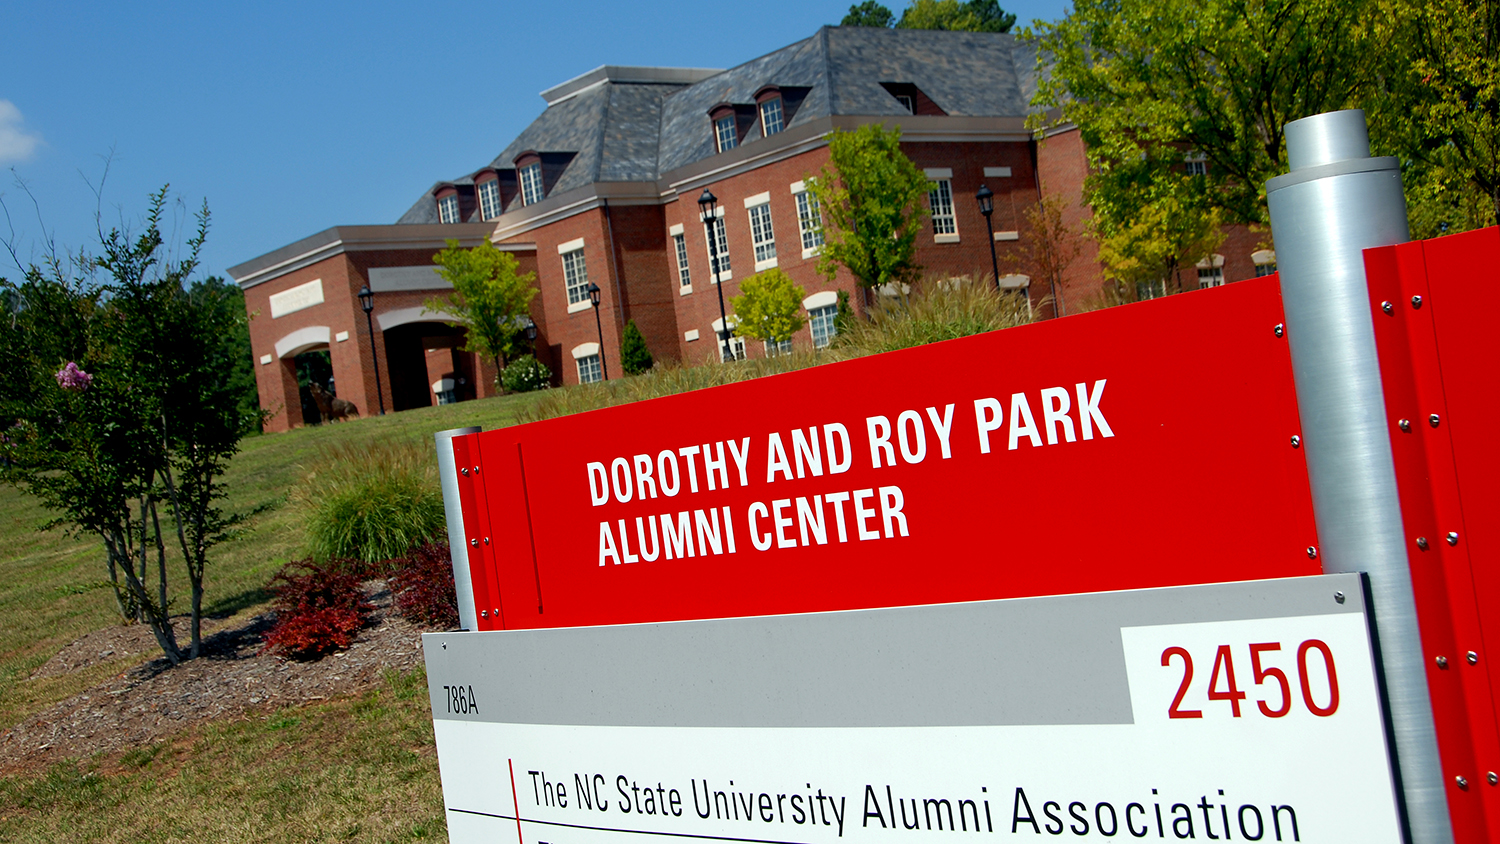 Park Alumni Center, with sign in the foreground.